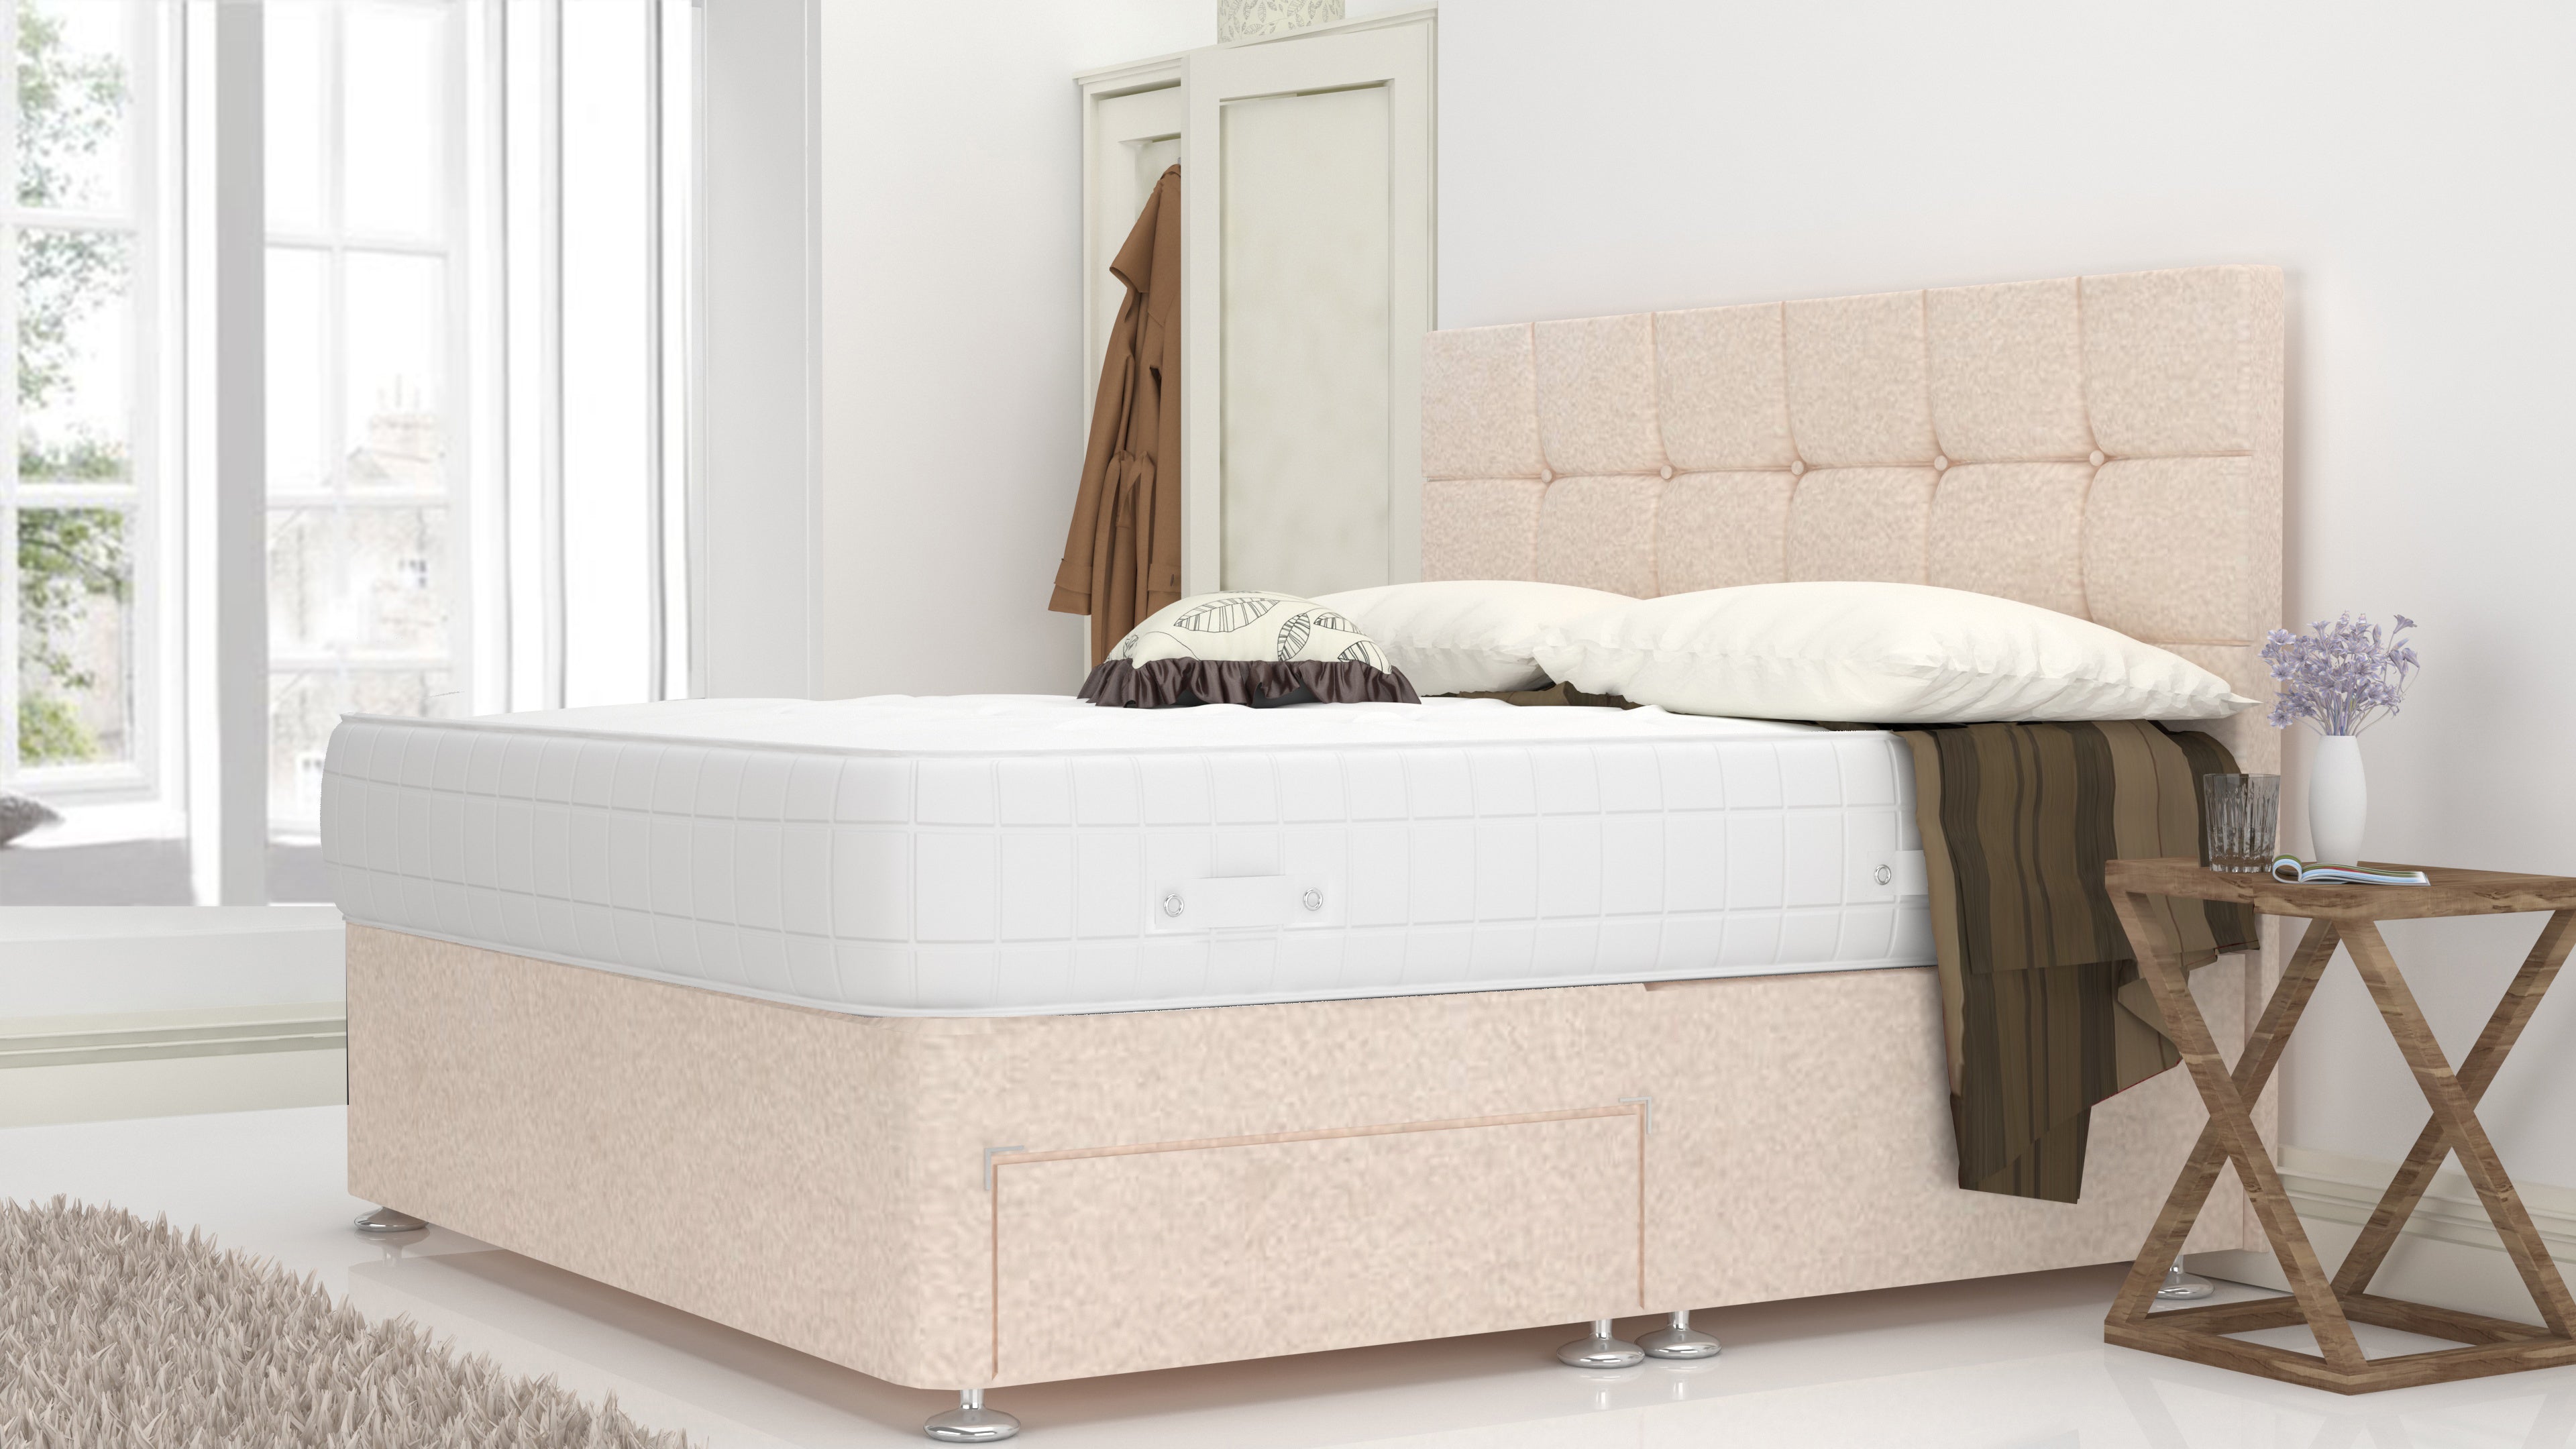 Cream Chanille 3 Feet Divan Bed Set With Cube Headboard (Included Feet) And Free Orthopedic Mattress